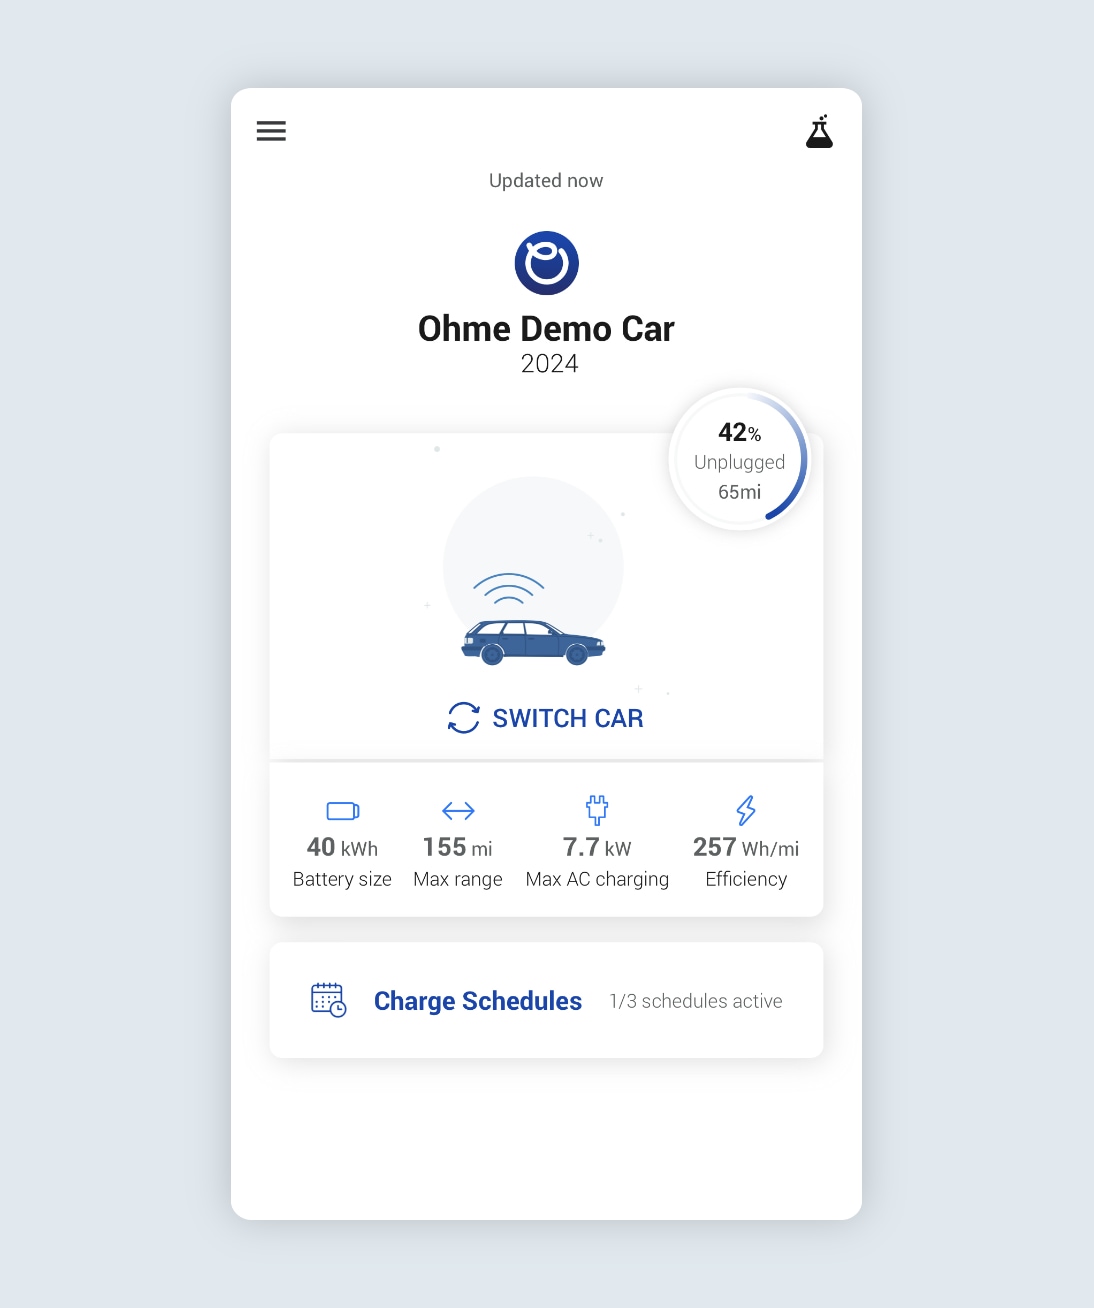 Manage my EV page showing a demo car selected and logged in with battery status displayed